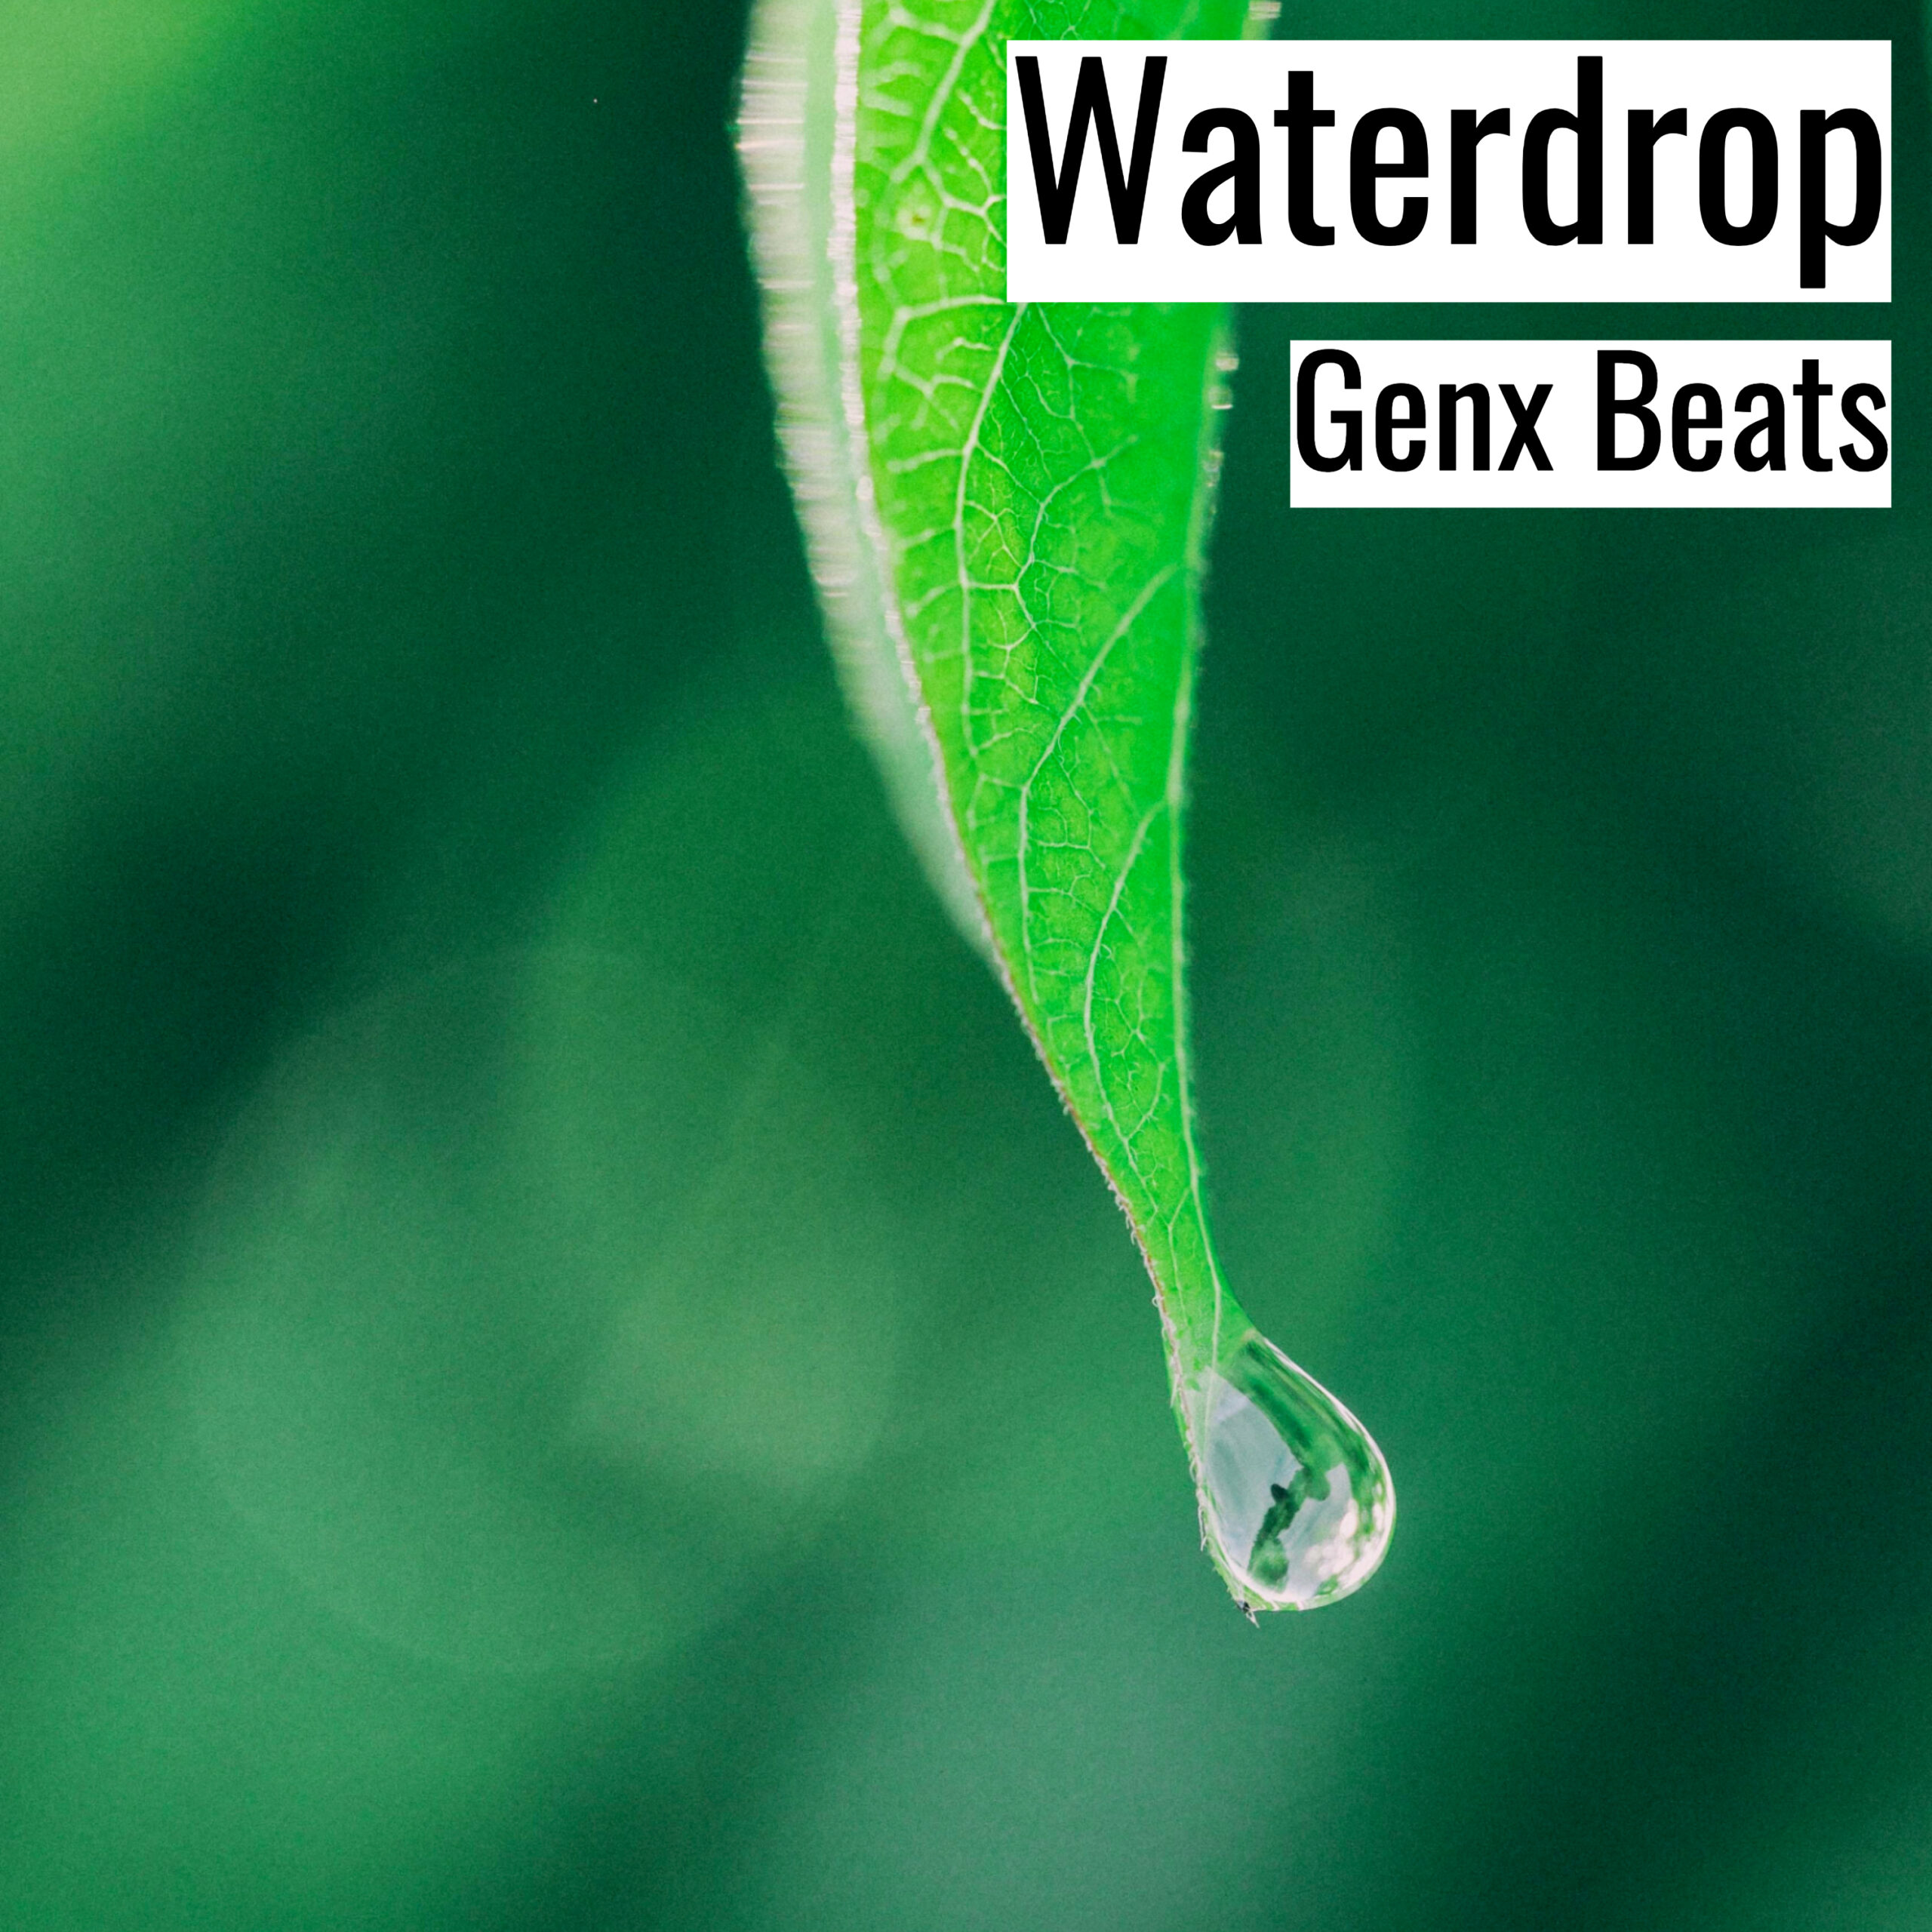 Waterdrop scaled 1